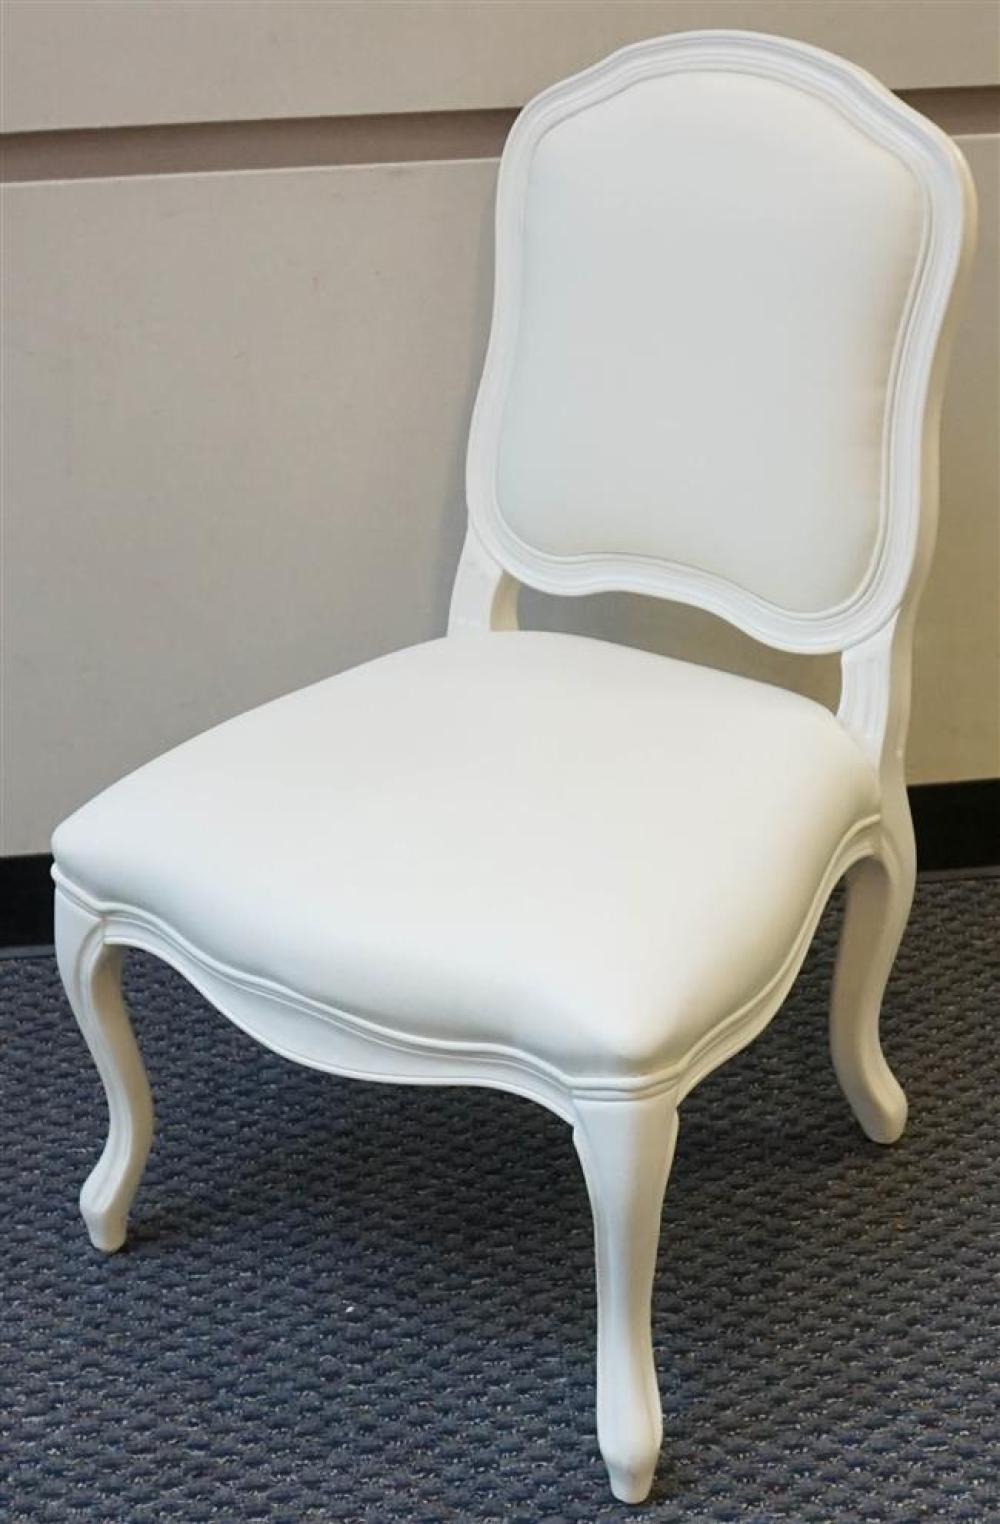 PROVINCIAL STYLE WHITE ENAMEL UPHOLSTERED 324a0b